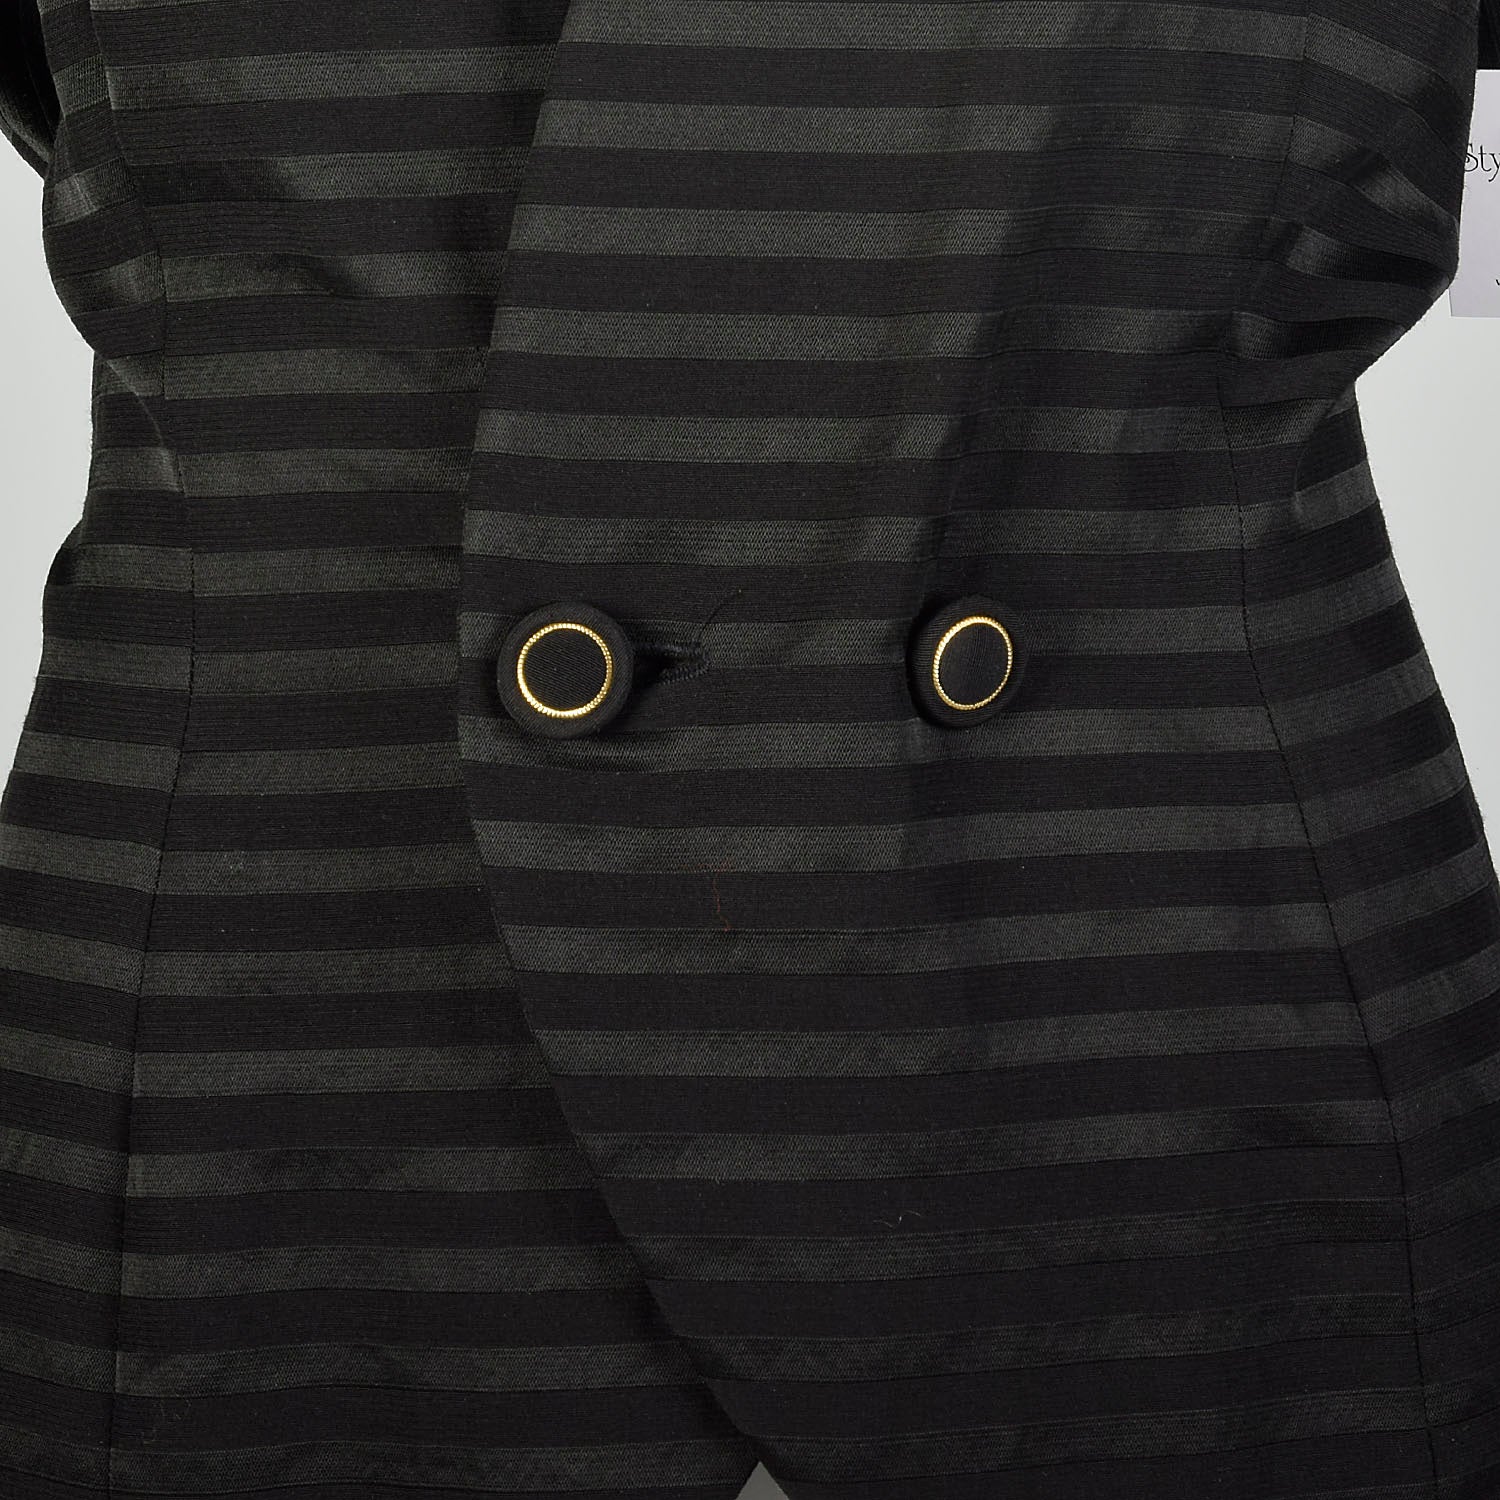 XL 1980s Dominic Serio Blazer Black Striped Power Shoulder Double Breasted Jacket